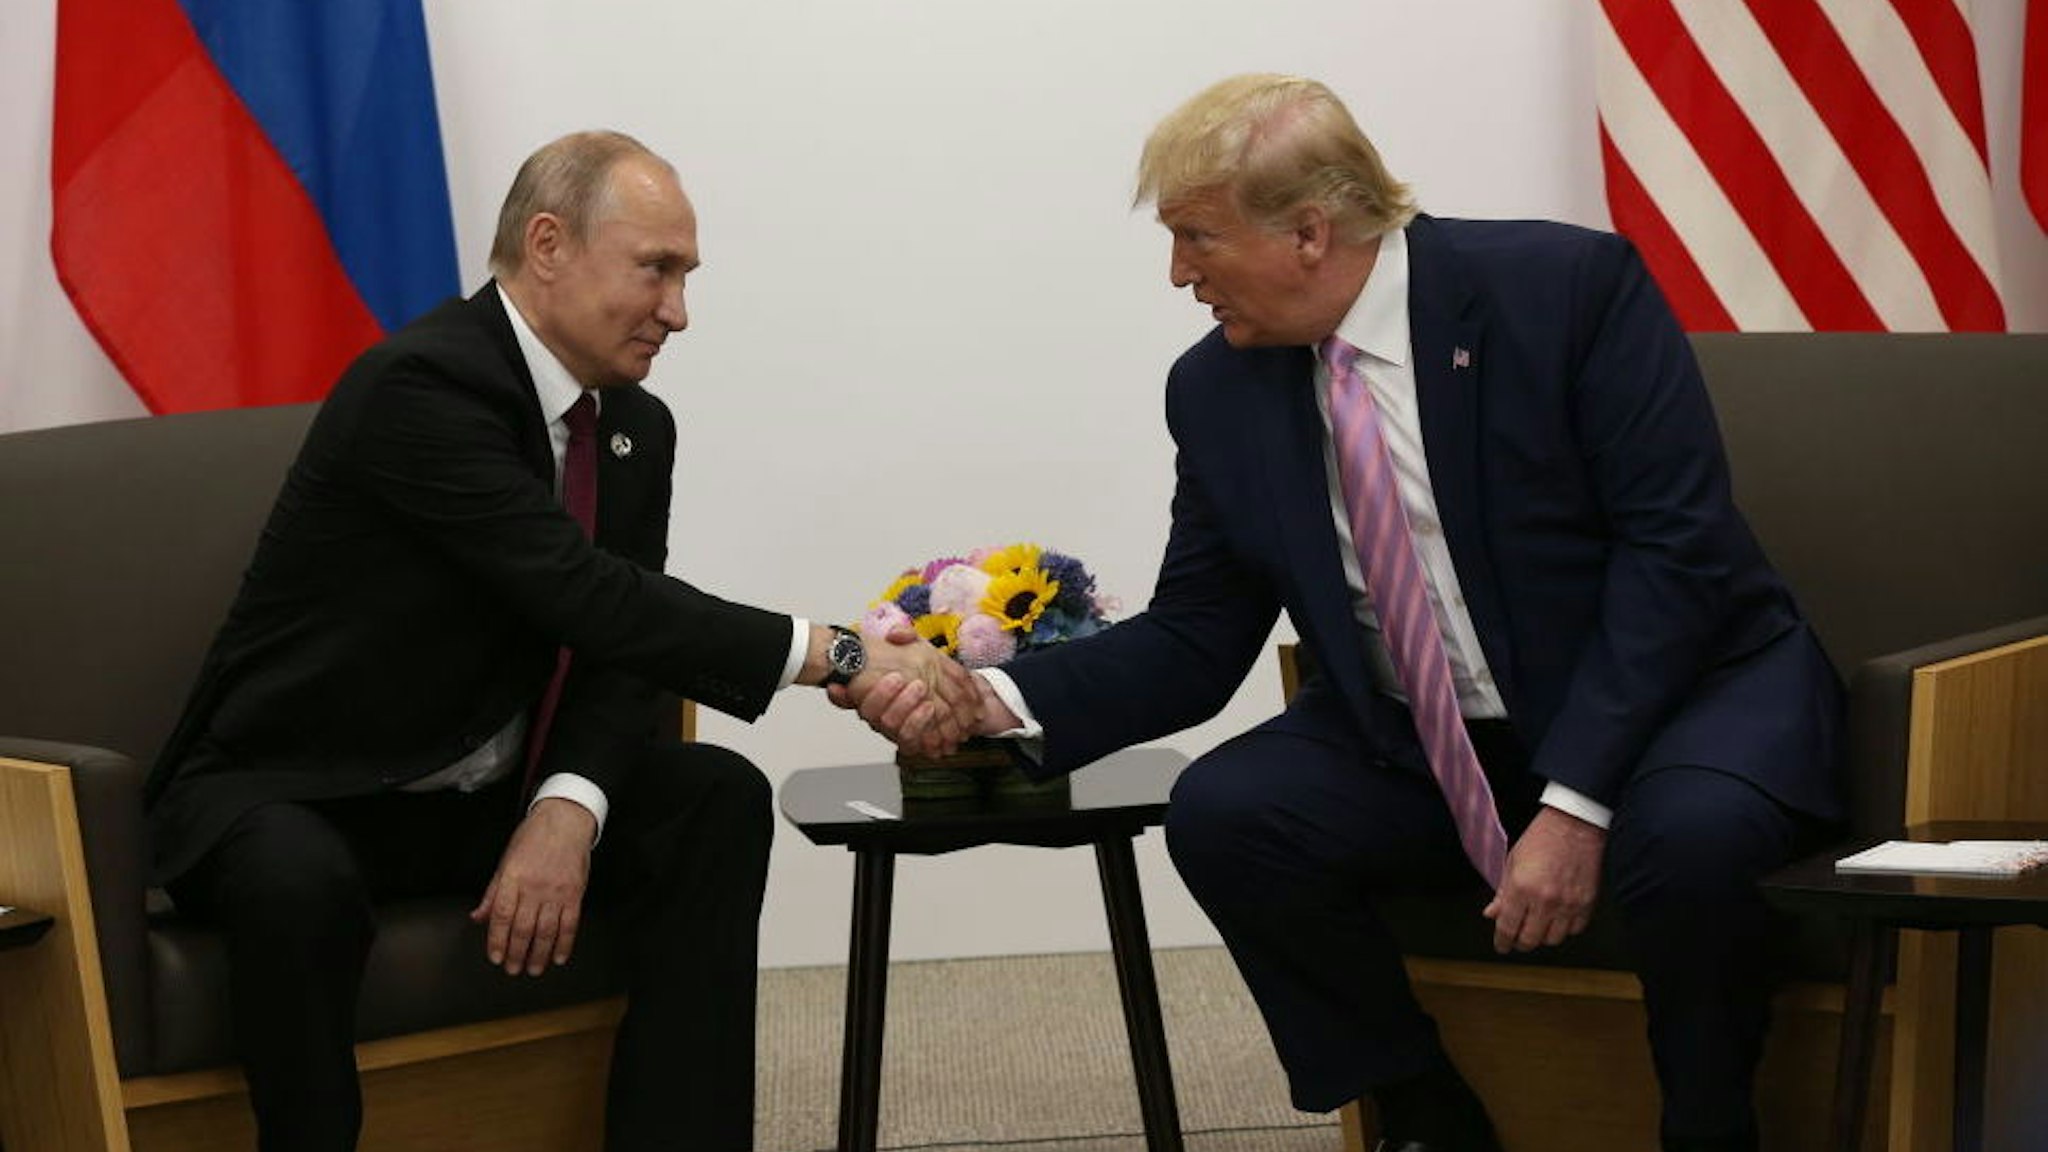 U.S. President Donald Trump (R) and Russian President Vladimir Putin (L) attend their bilateral meeting at the G20 Osaka Summit 2019, in Osaka, Japan, June,28,2019. Vladimir Putin has arrived to Japan to partcipate the G20 Osaka Summit and to meet U.S.President Donald Trump. Photo by Mikhail Svetlov/Getty Images